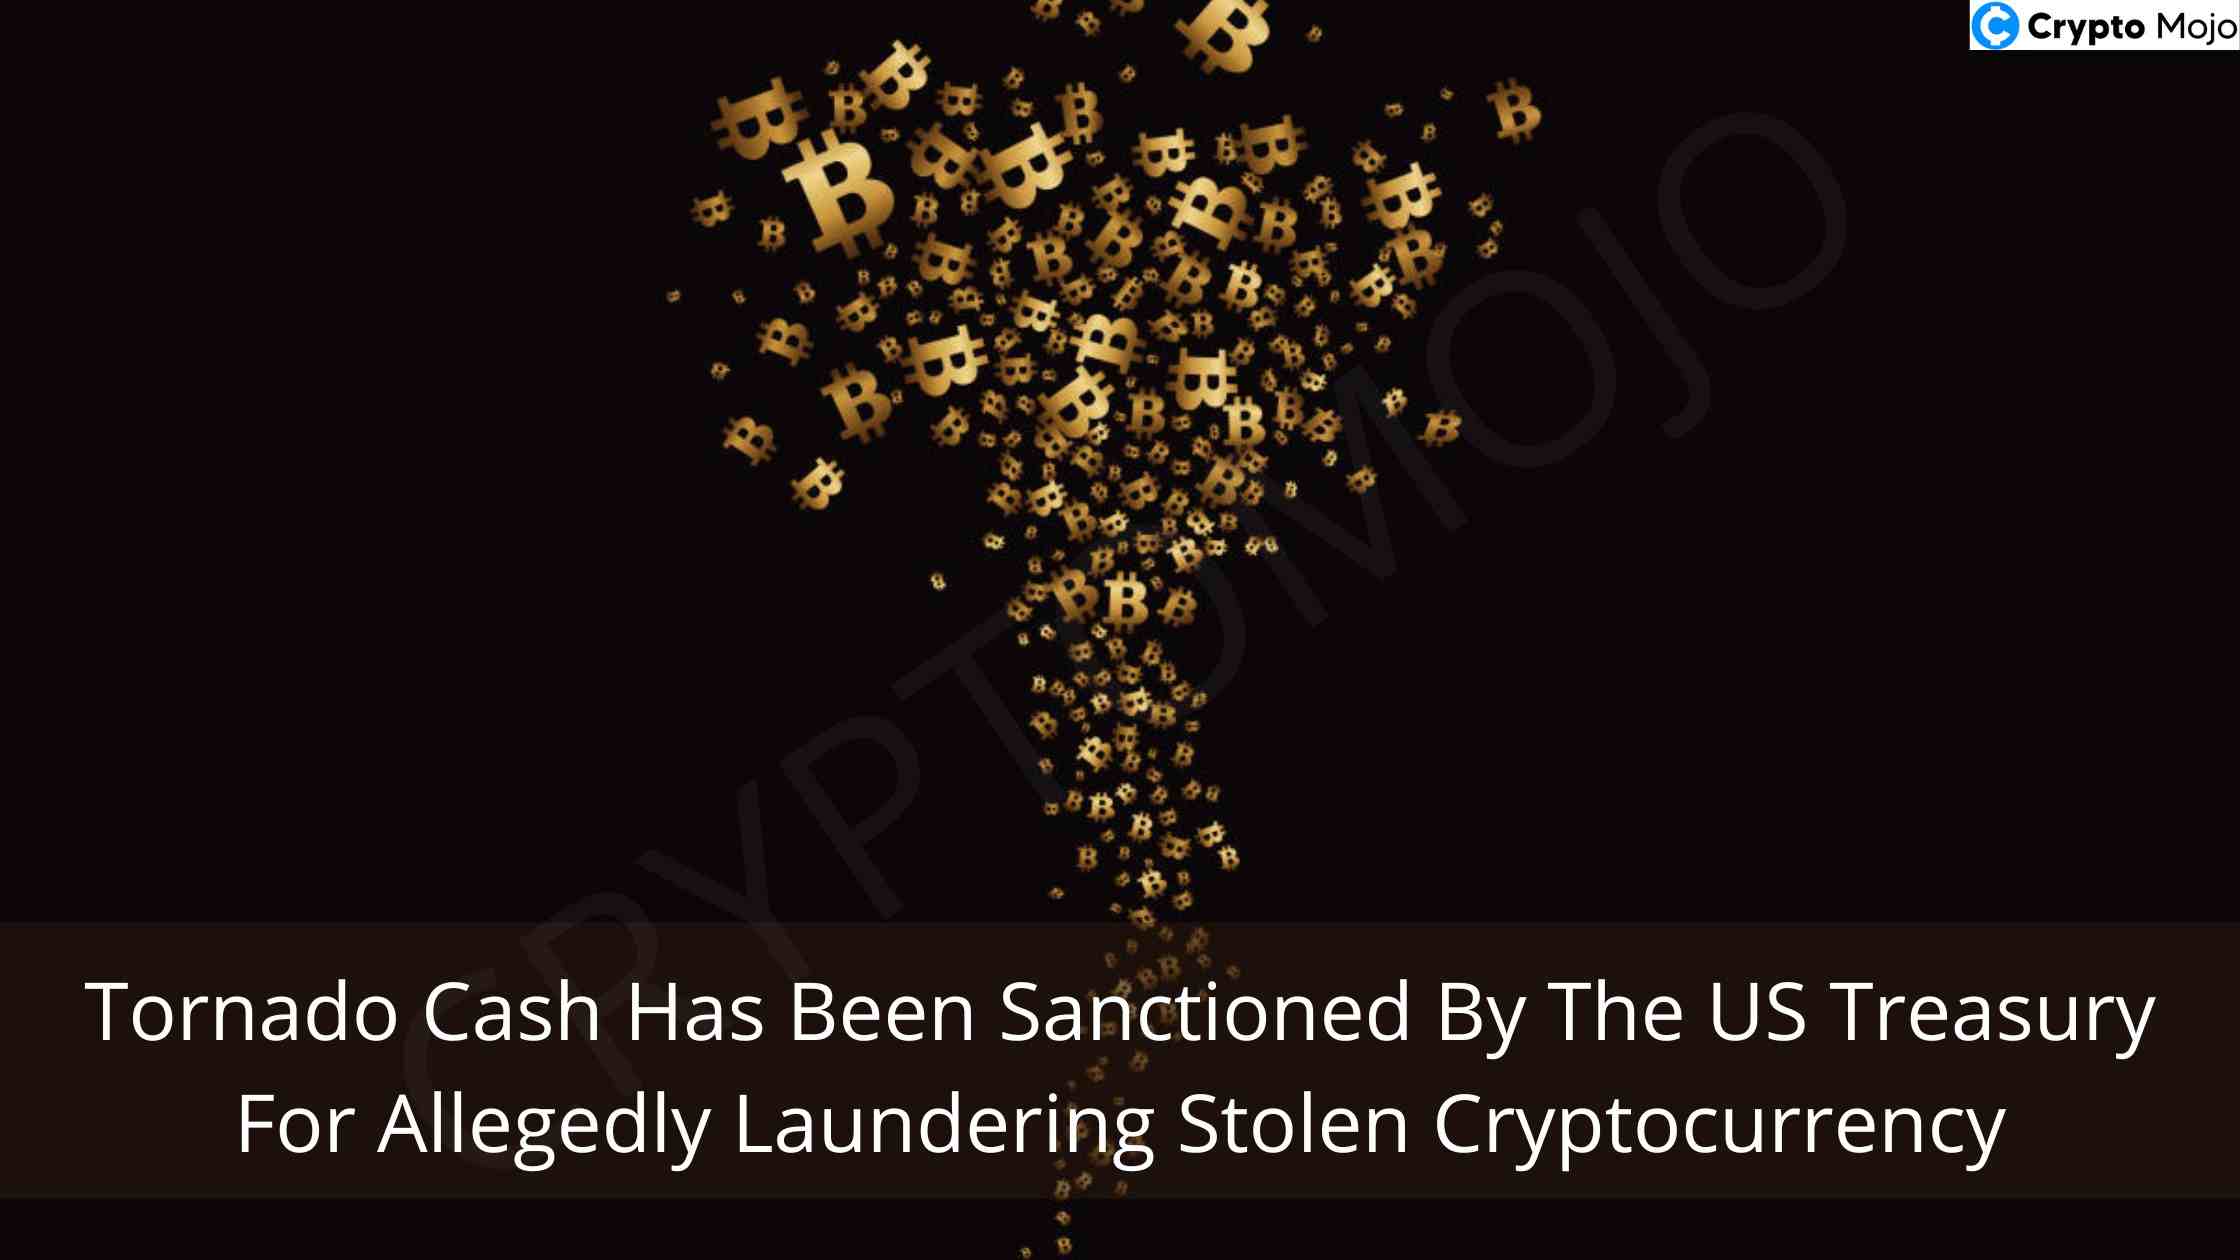 Tornado Cash Has Been Sanctioned By The US Treasury For Allegedly Laundering Stolen Cryptocurrency!